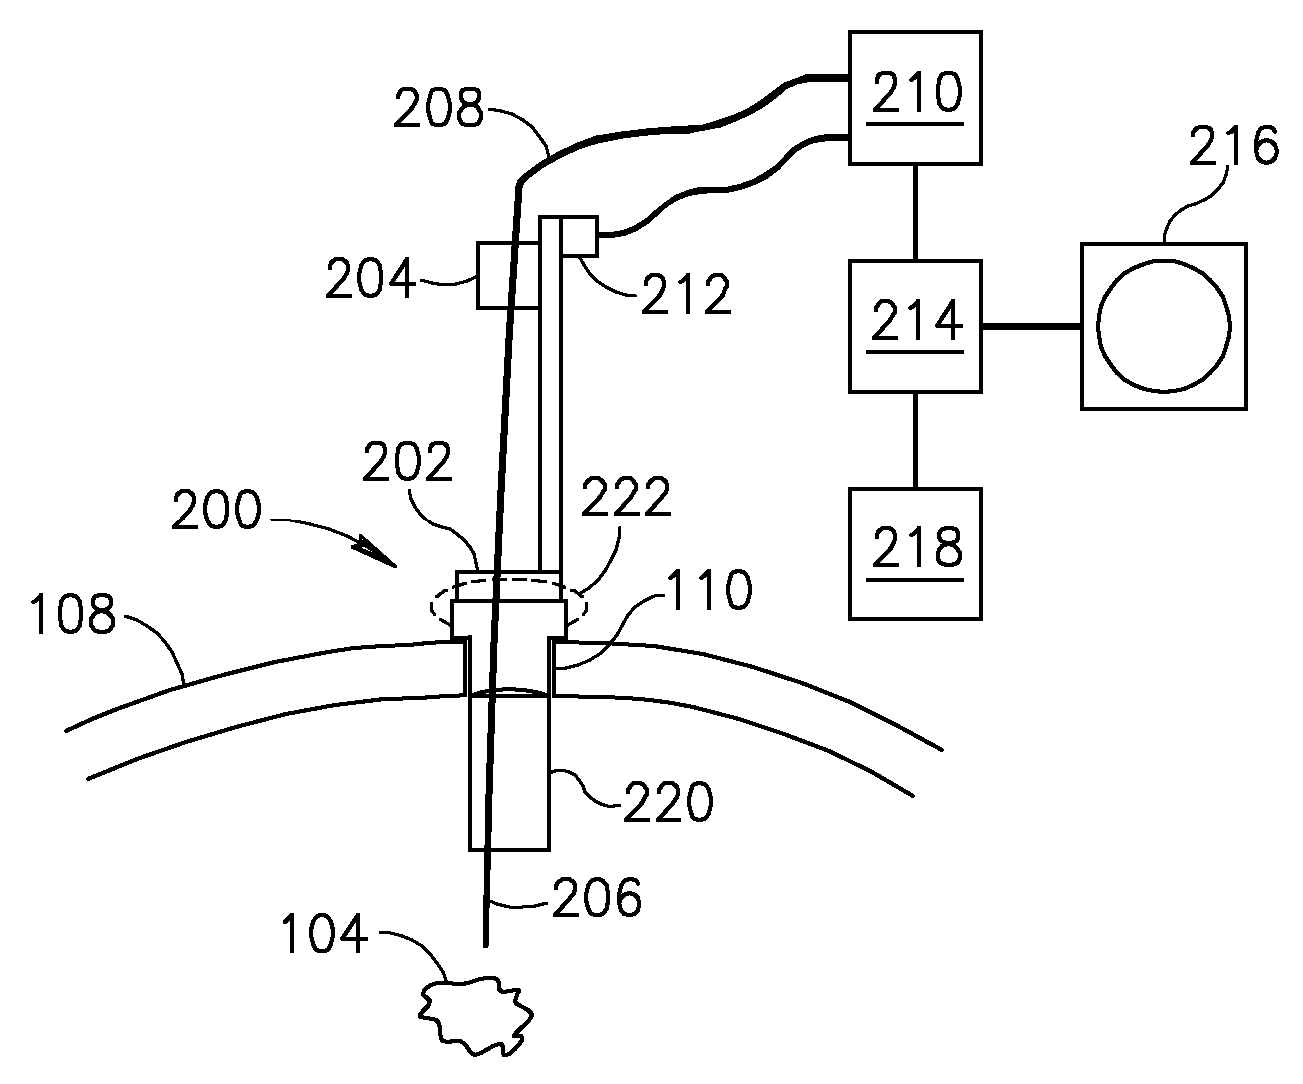 Electrode System For Neural Applications